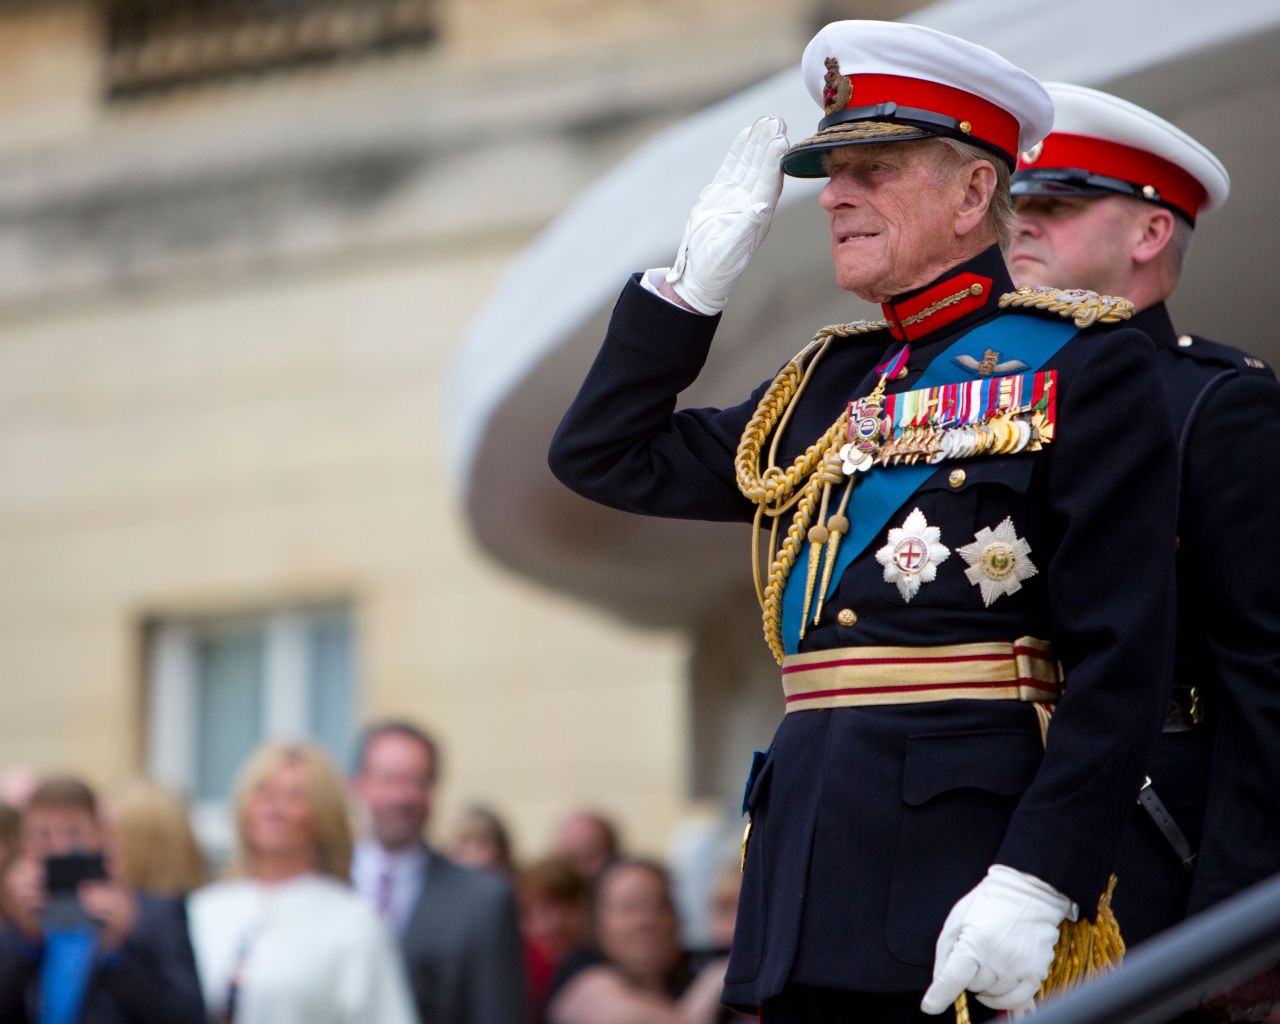 <strong>"The Real Prince Philip"</strong>: This documentary celebrates the life and achievements of Prince Philip, emphasizing the role his military experiences played in his later achievements, and suggesting that his admirable ethos of "service" and "duty" was forged during his impressive Naval career. <strong>(Acorn TV)</strong>